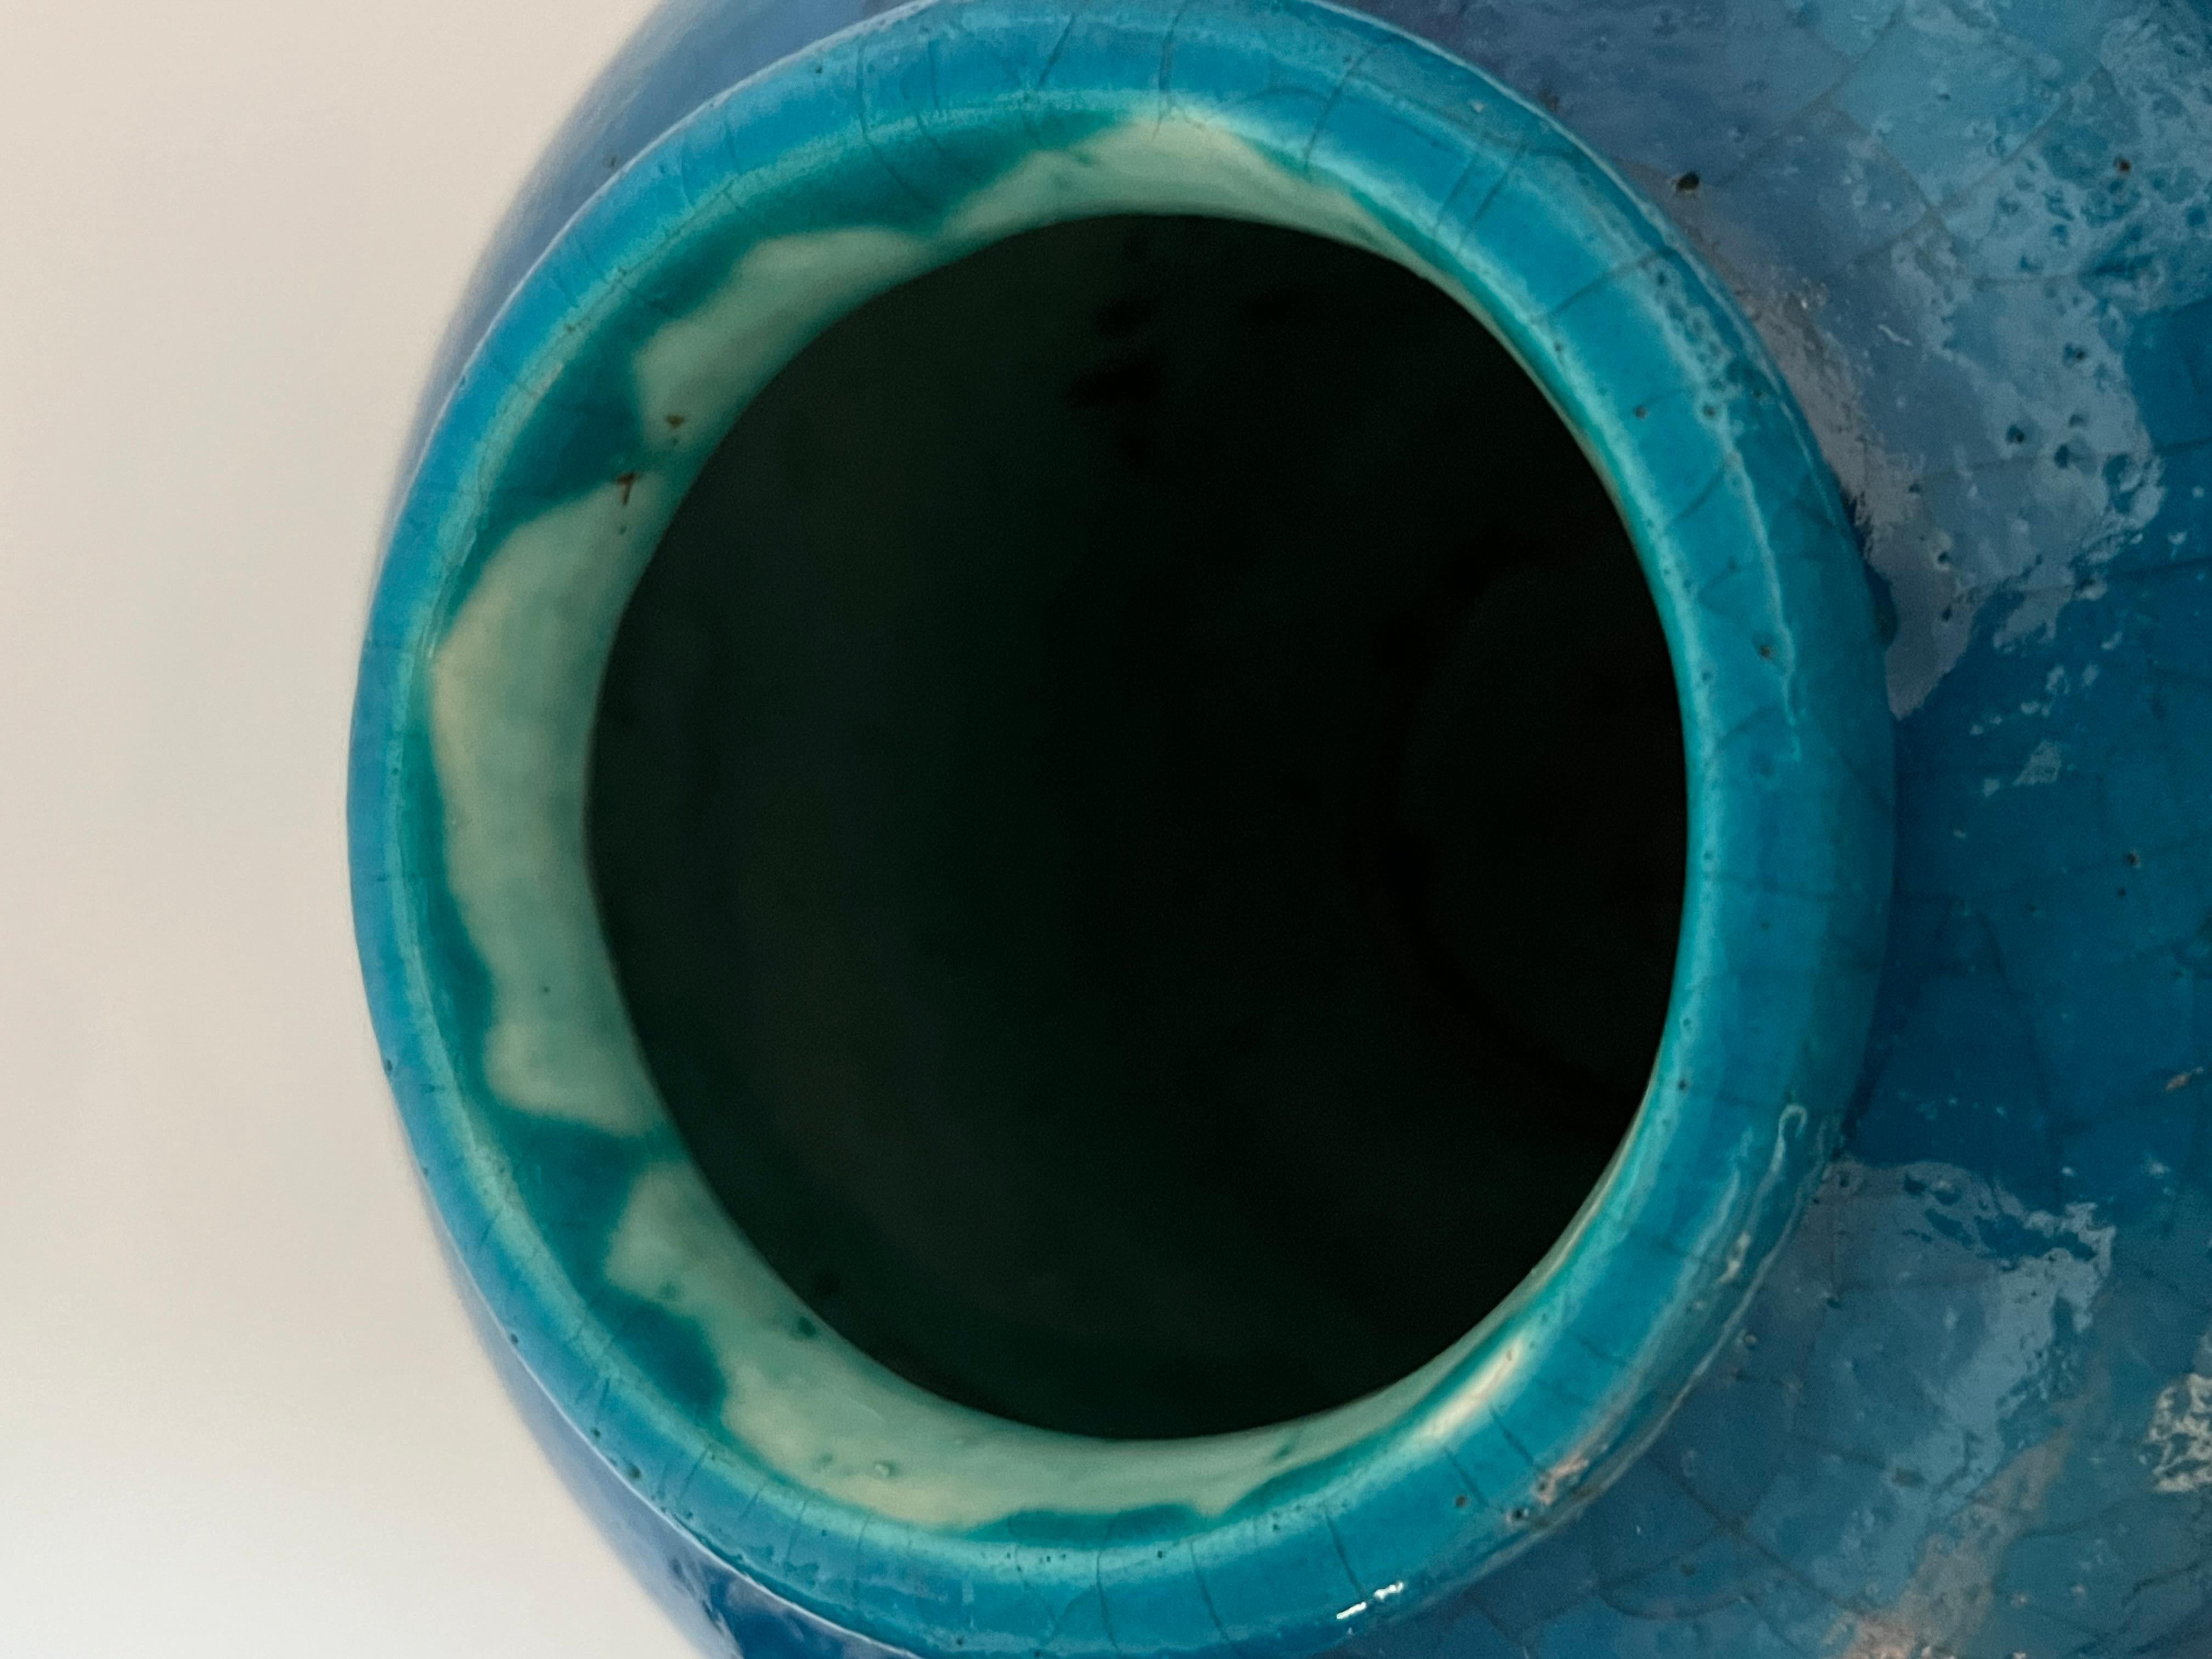 This unusual double bulb shaped faience vase is in the manner of Edmond Lachenal but there are no markings on the bottom. The rich mottled turquoise blue glaze gives it the feeling of true Egyptian faience.